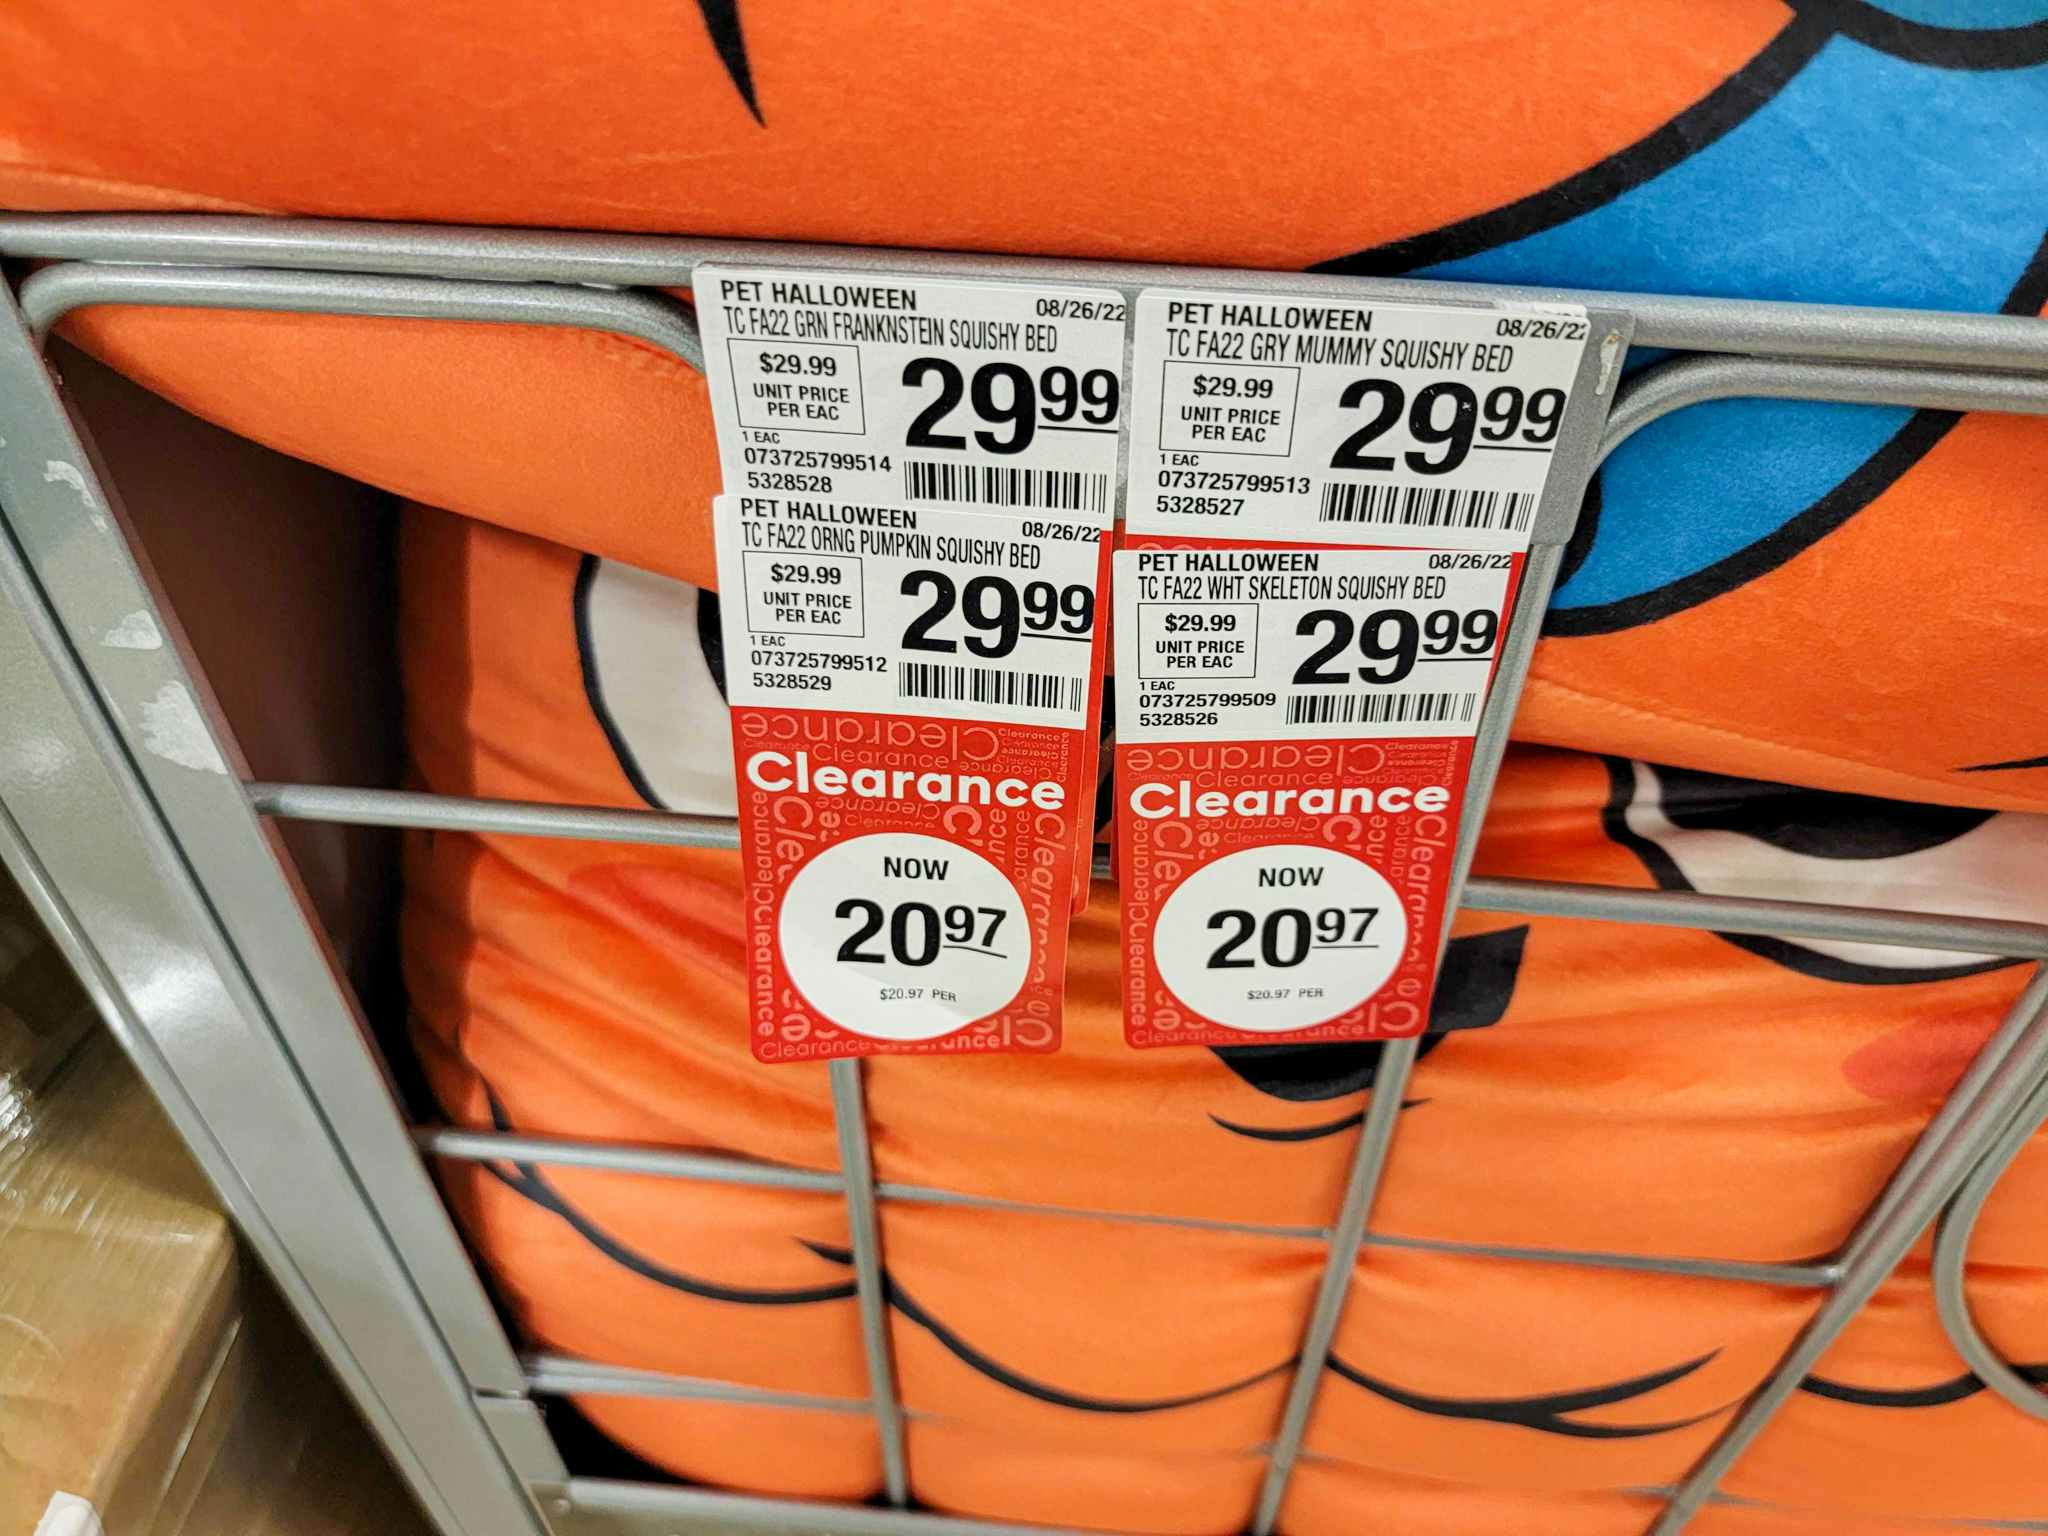 clearance tag for pet halloween beds marked down to 20.97